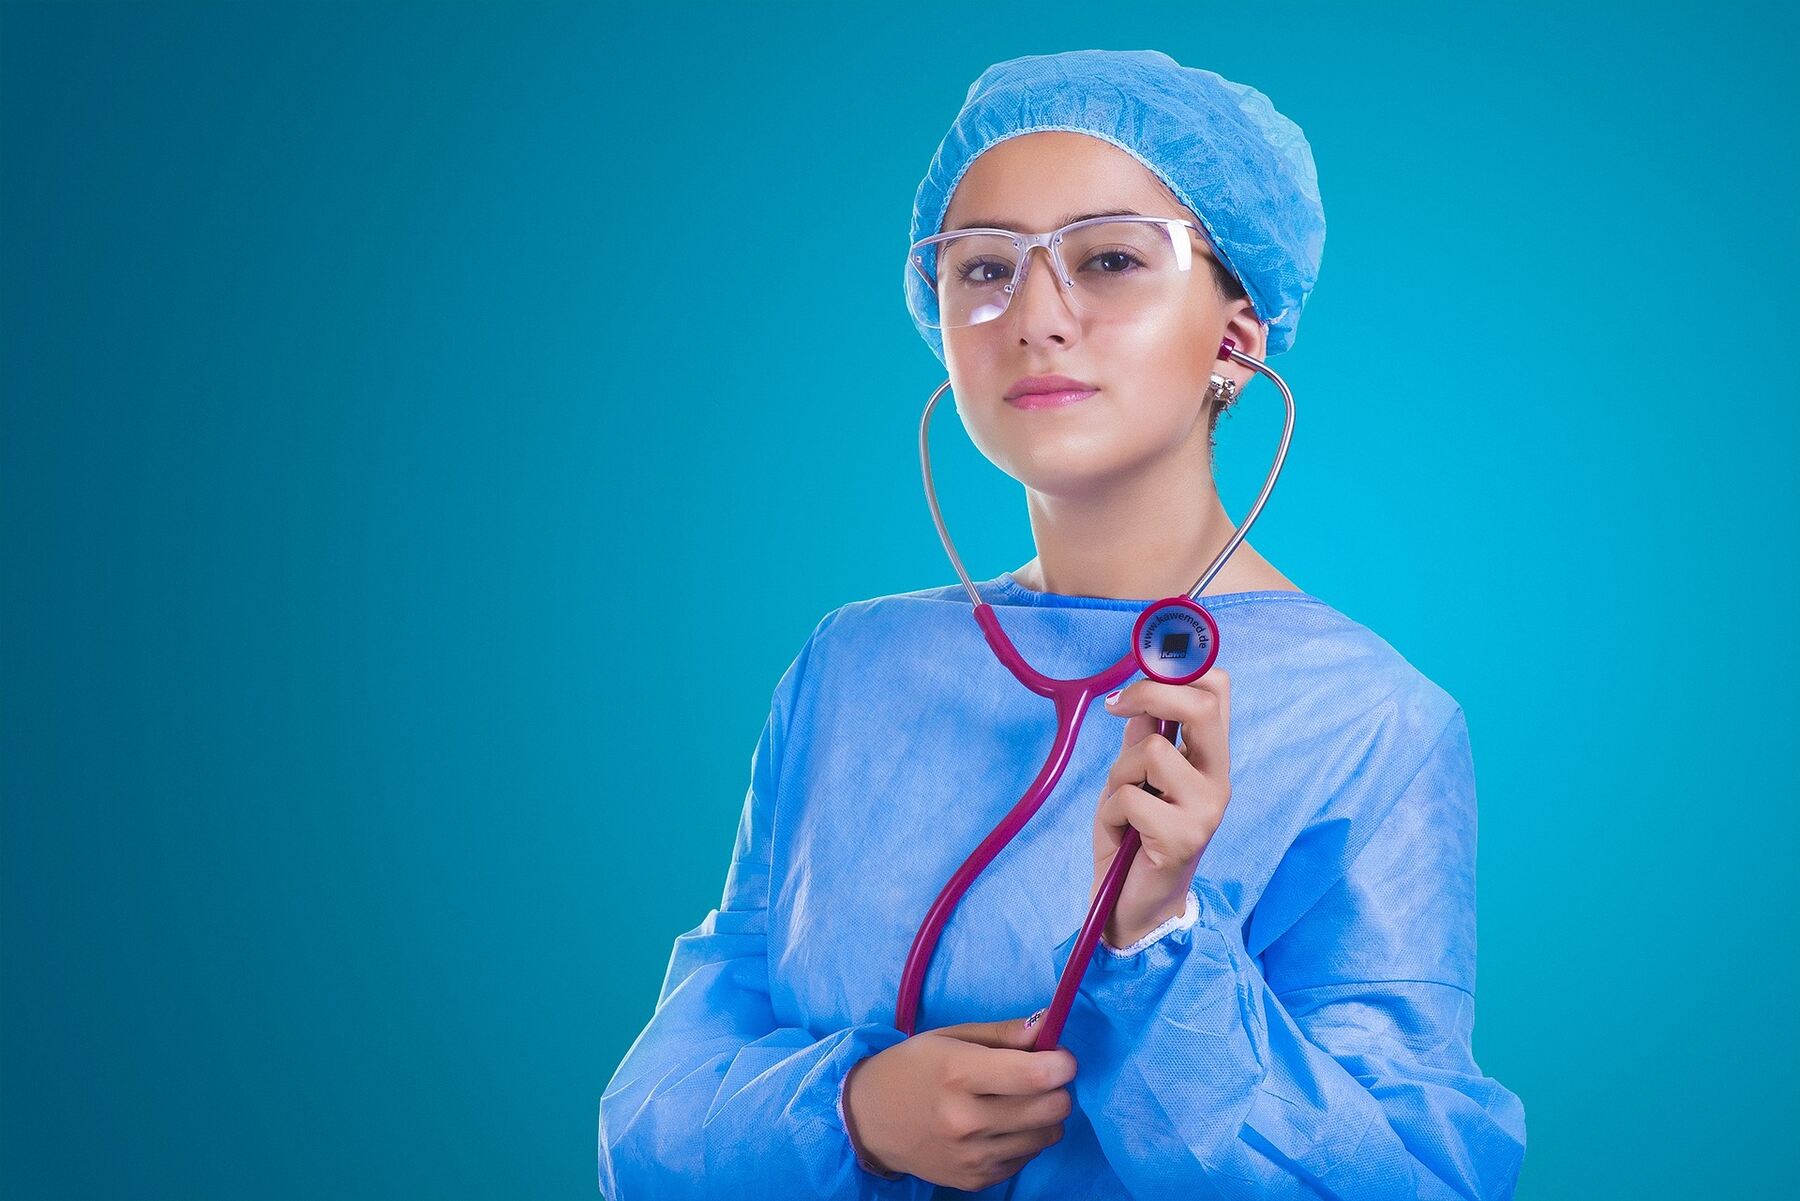 A female healthcare professional in blue scrubs holding a stethoscope